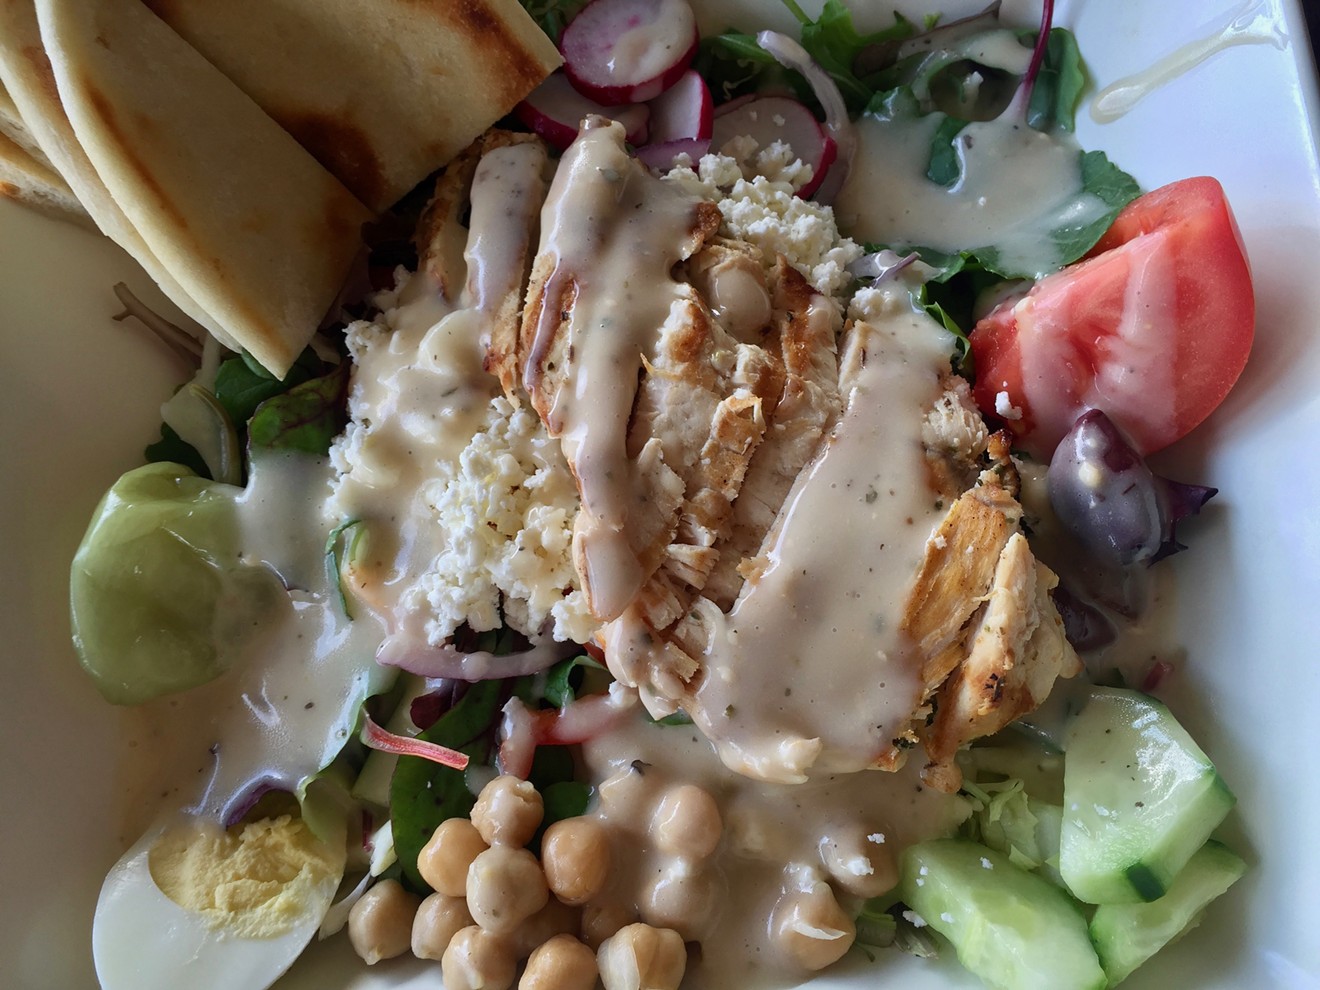 This salad will make you a lunchtime regular.